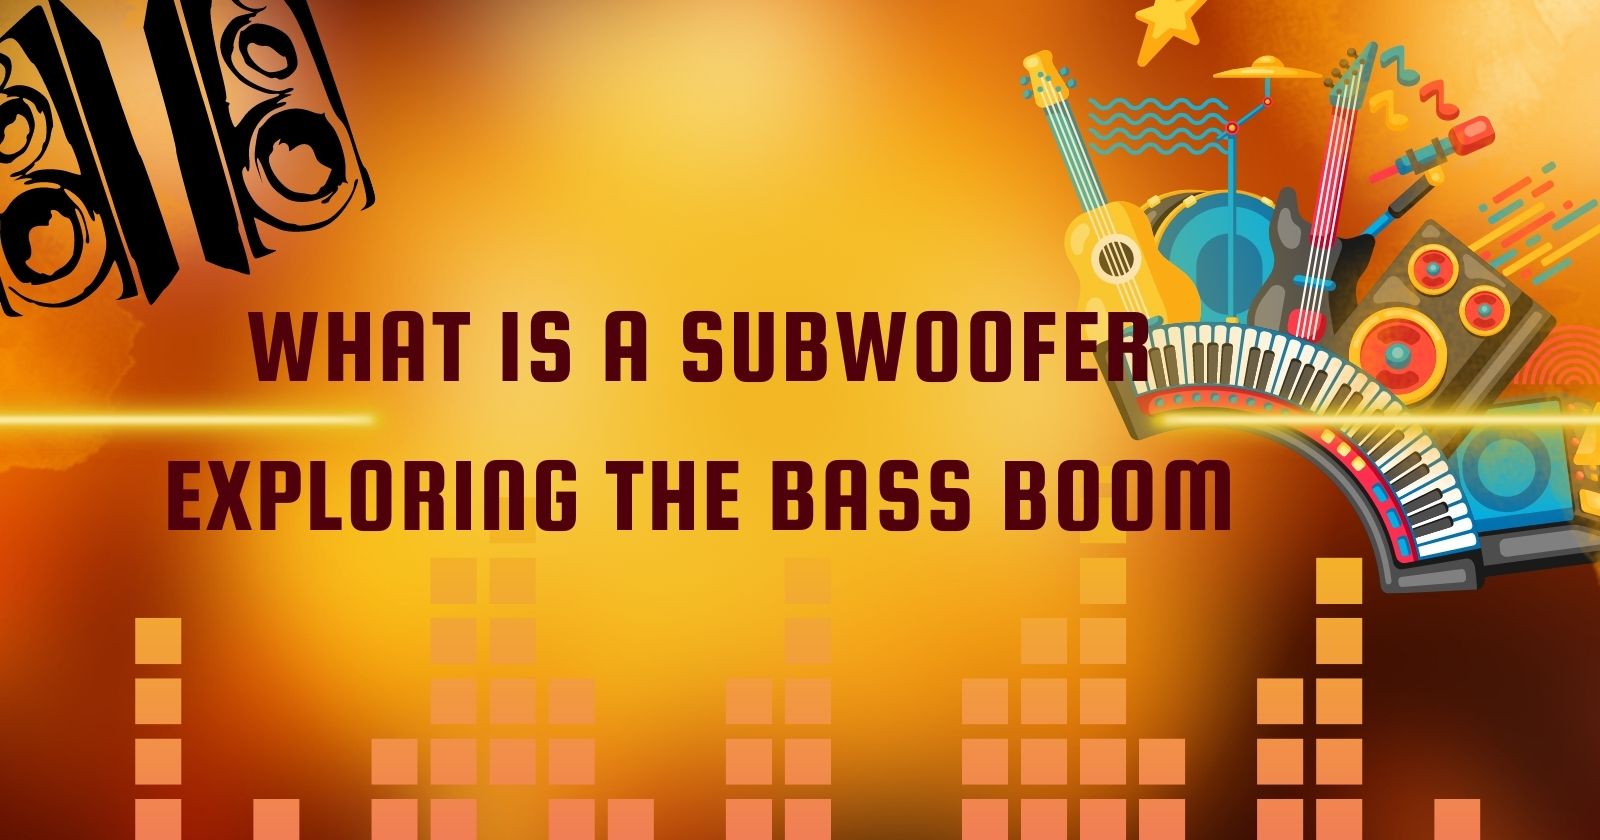 What is subwoofer